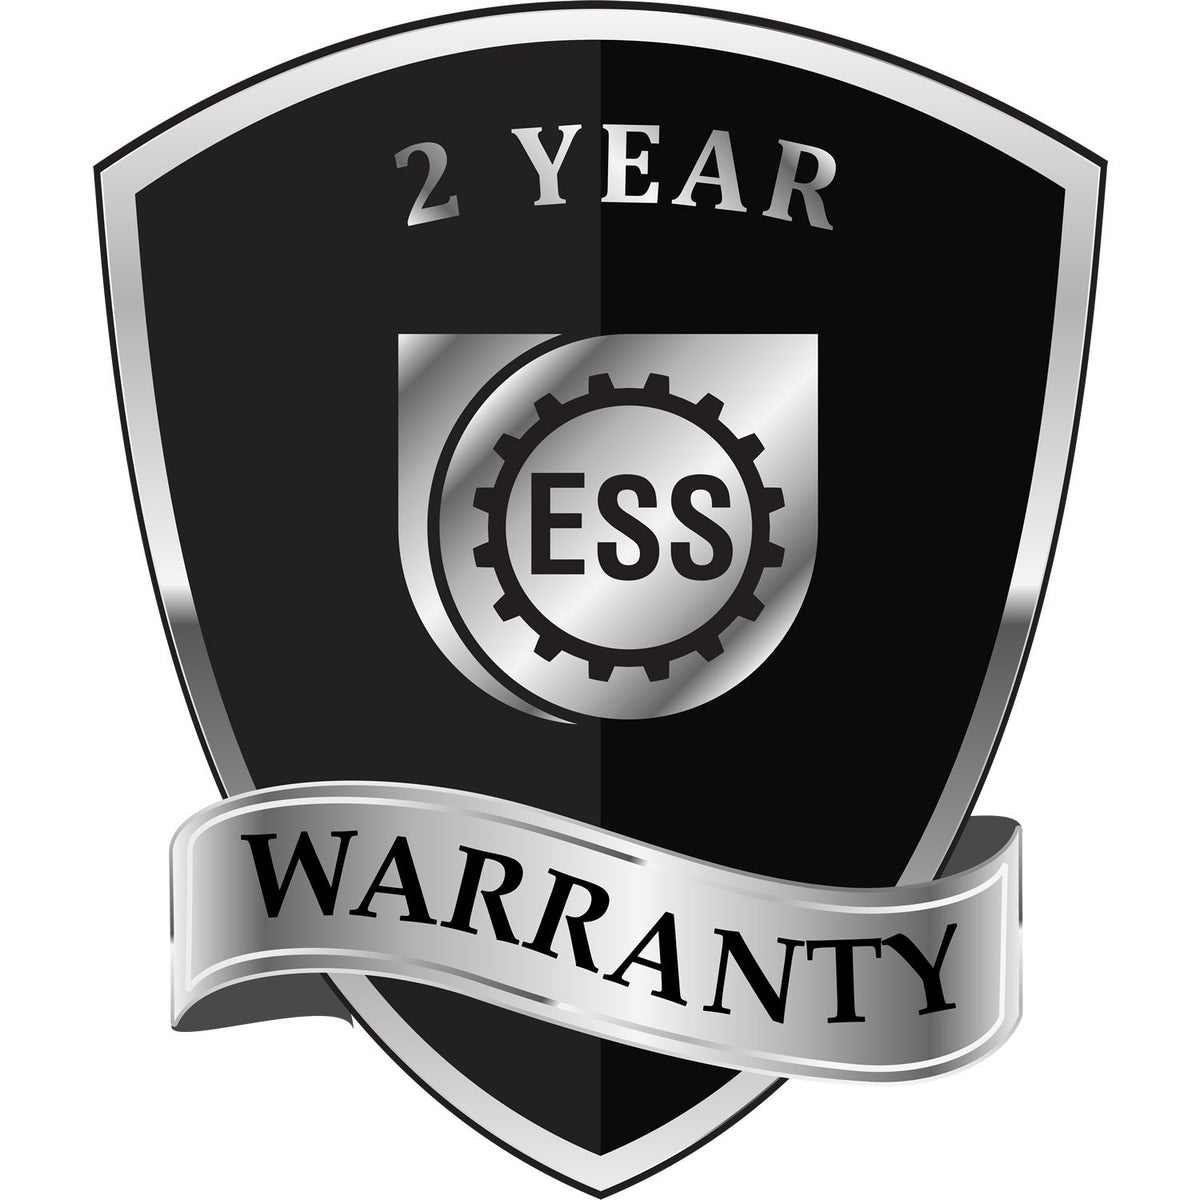 A badge or emblem showing a warranty icon for the State of North Dakota Extended Long Reach Engineer Seal